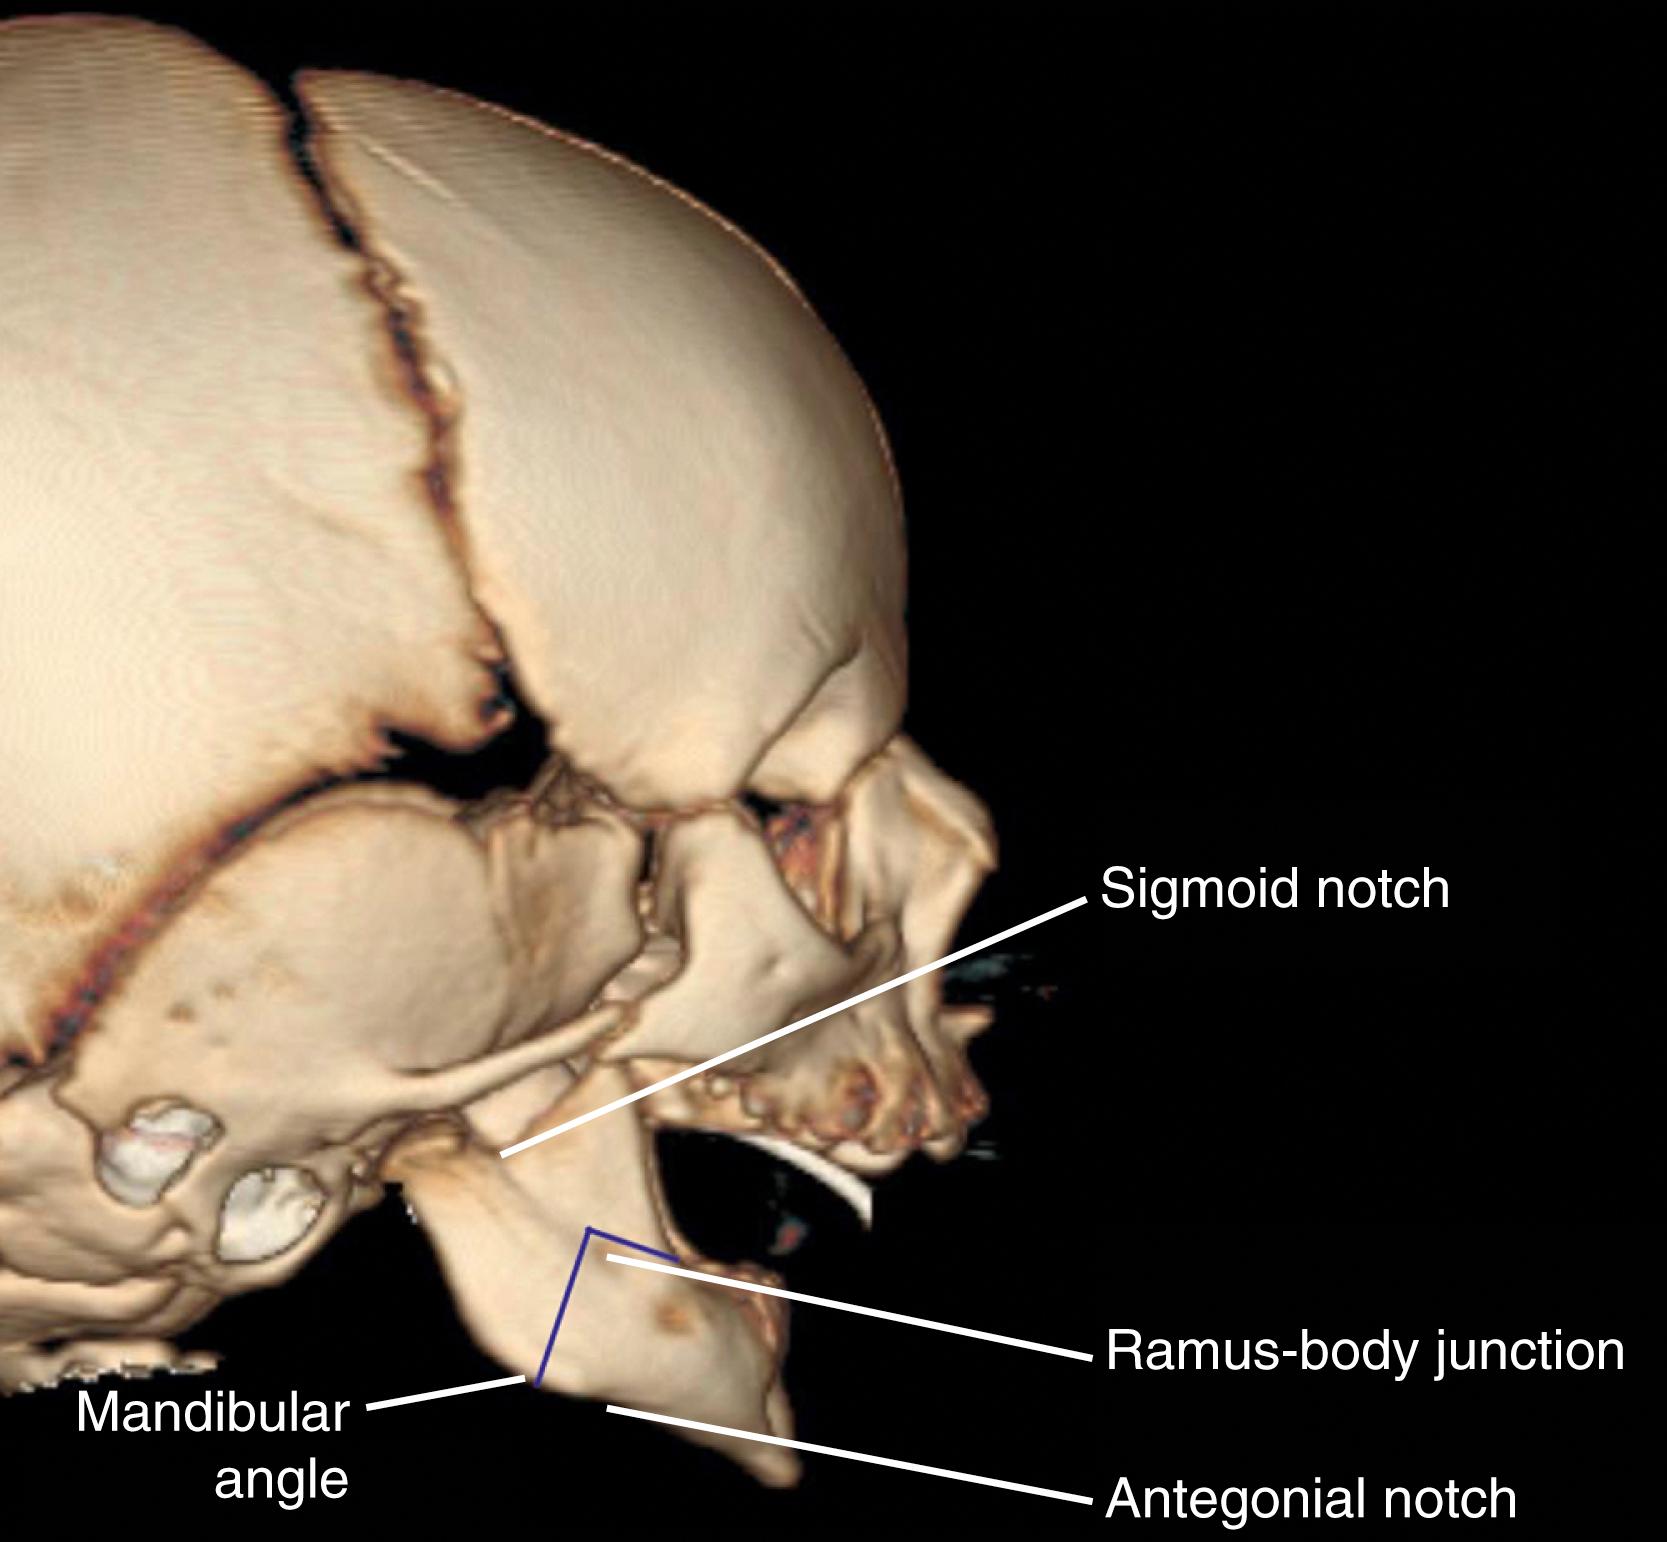 Fig. 202.2, Computed tomography scan of the mandible with 3D reconstruction showing key landmarks in white and planned “inverted-L” osteotomy in blue. This osteotomy position avoids the most posterior developing tooth bud, which is generally located in the position marked “Ramus-Body Junction.” Significant maxillary-mandibular discrepancy is noted.